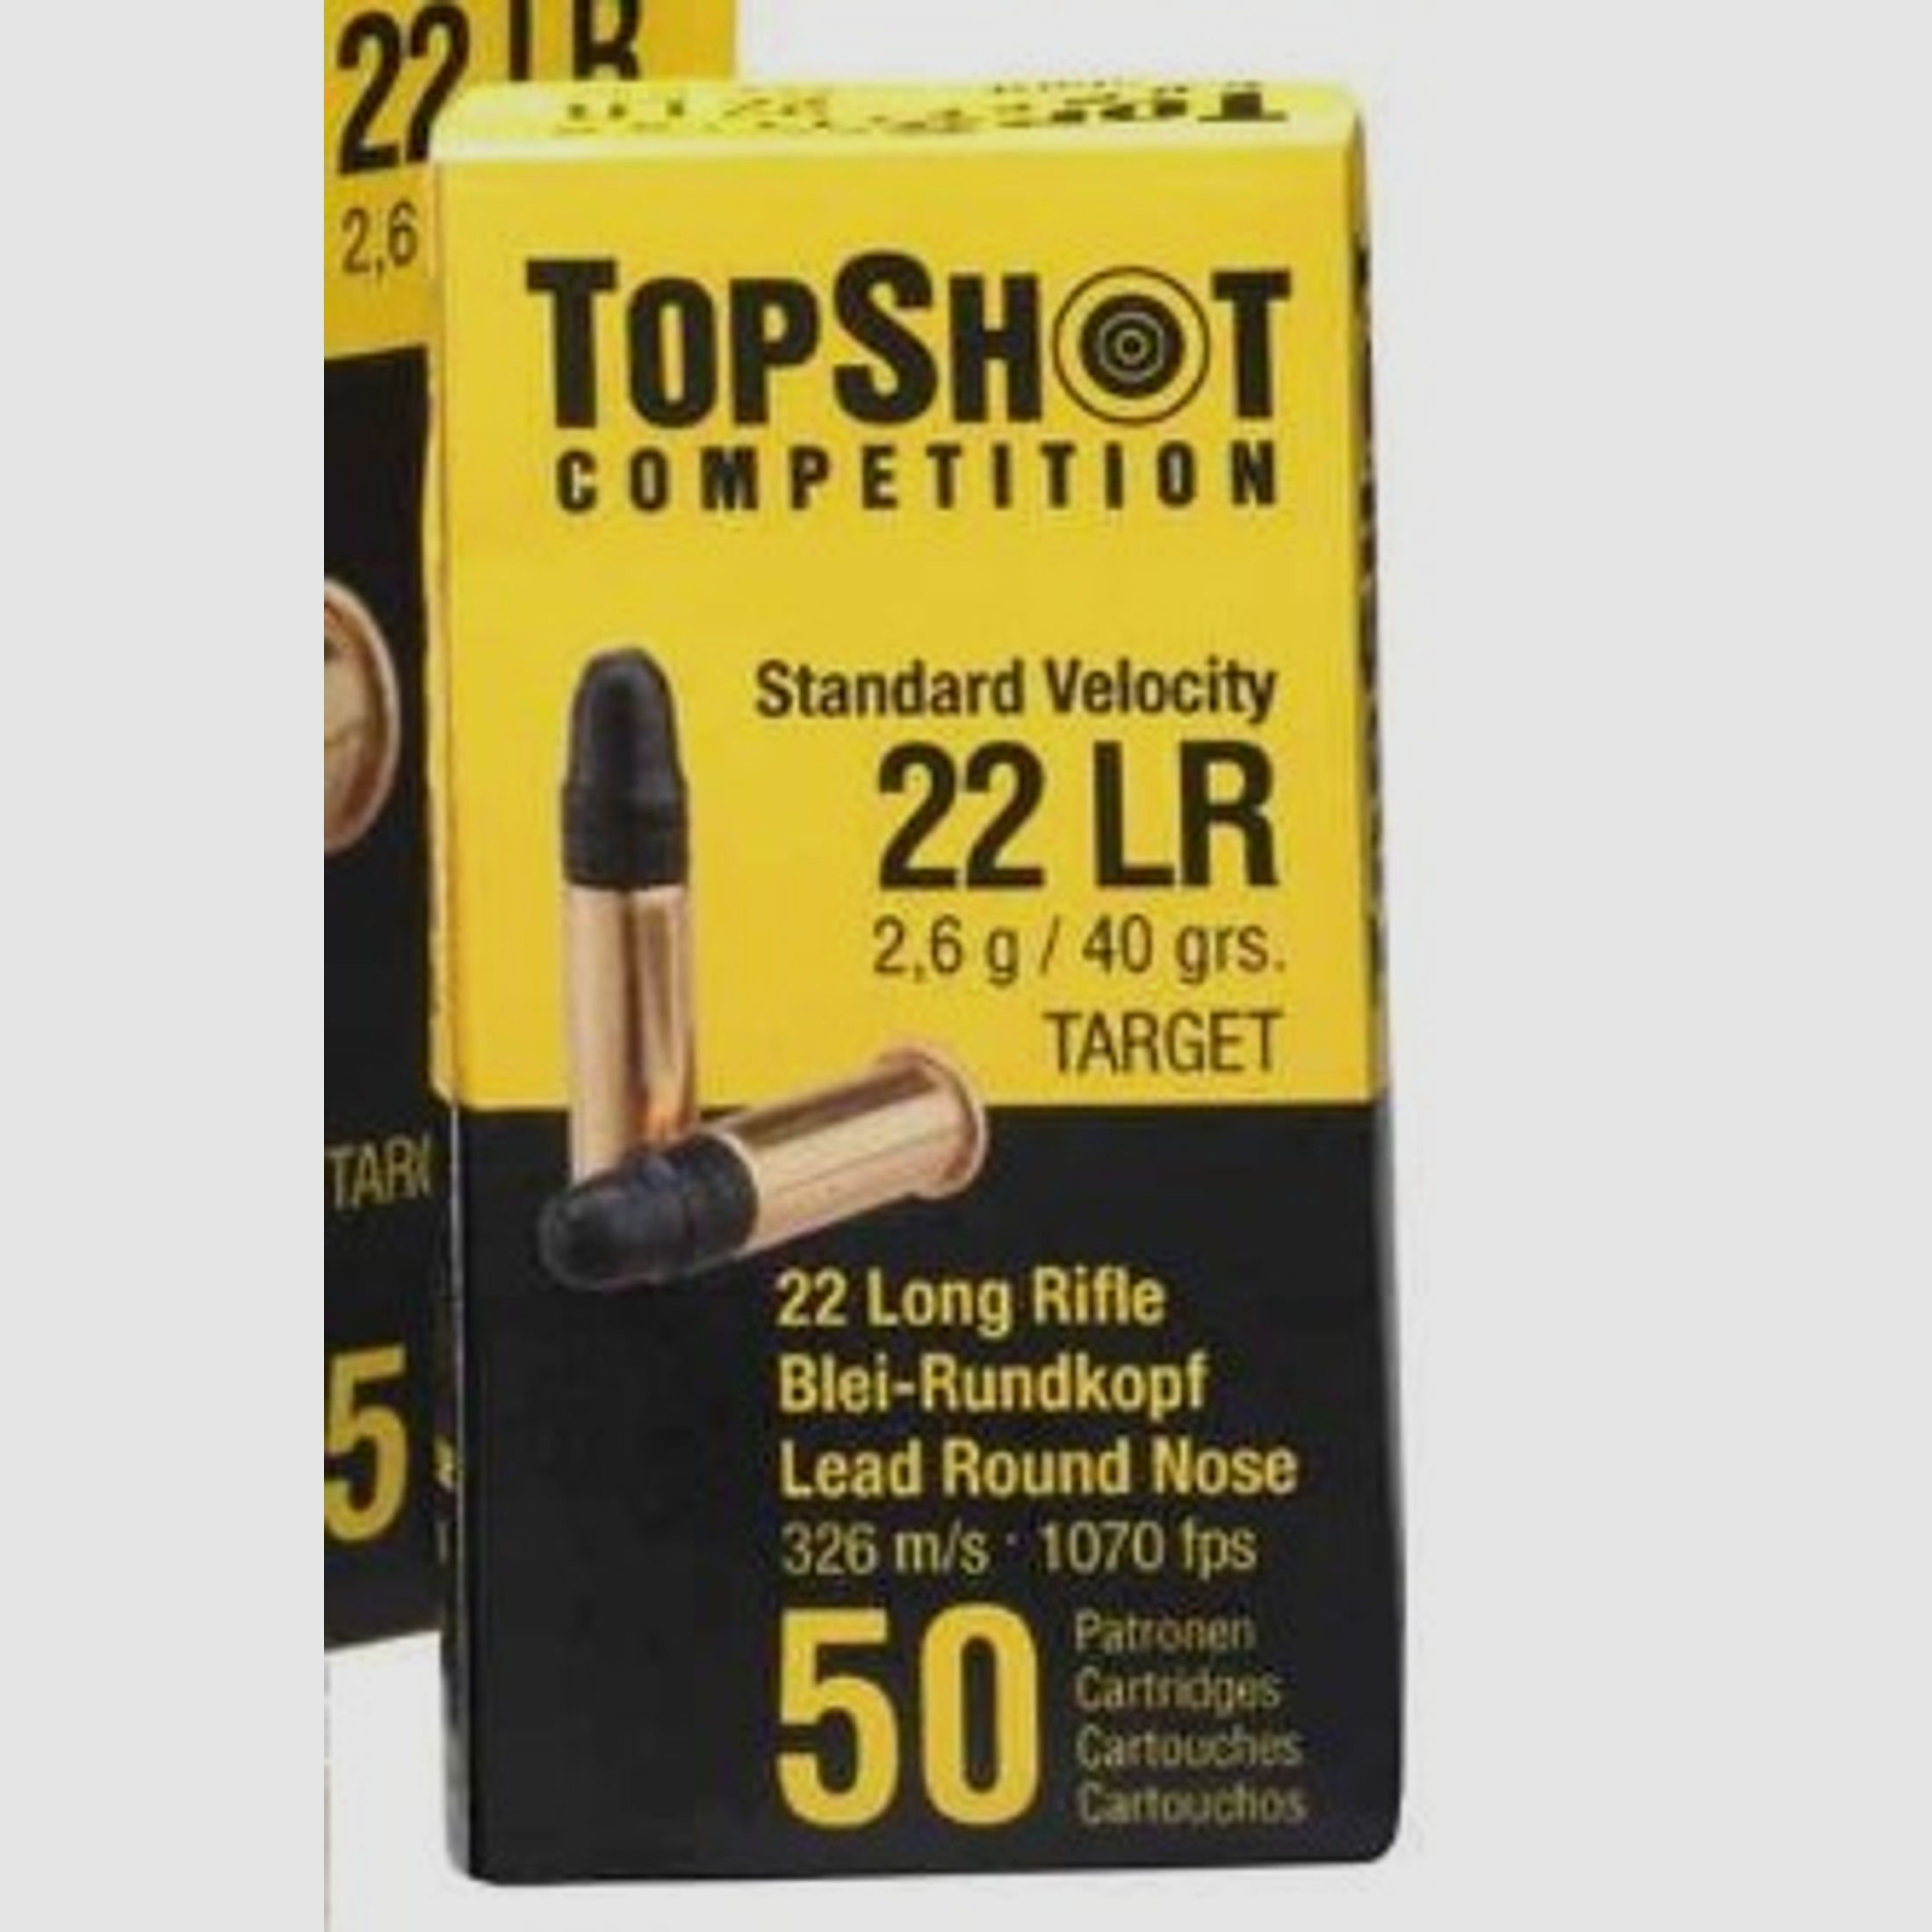 TOPSHOT Competition, .22 lfb., SV Target